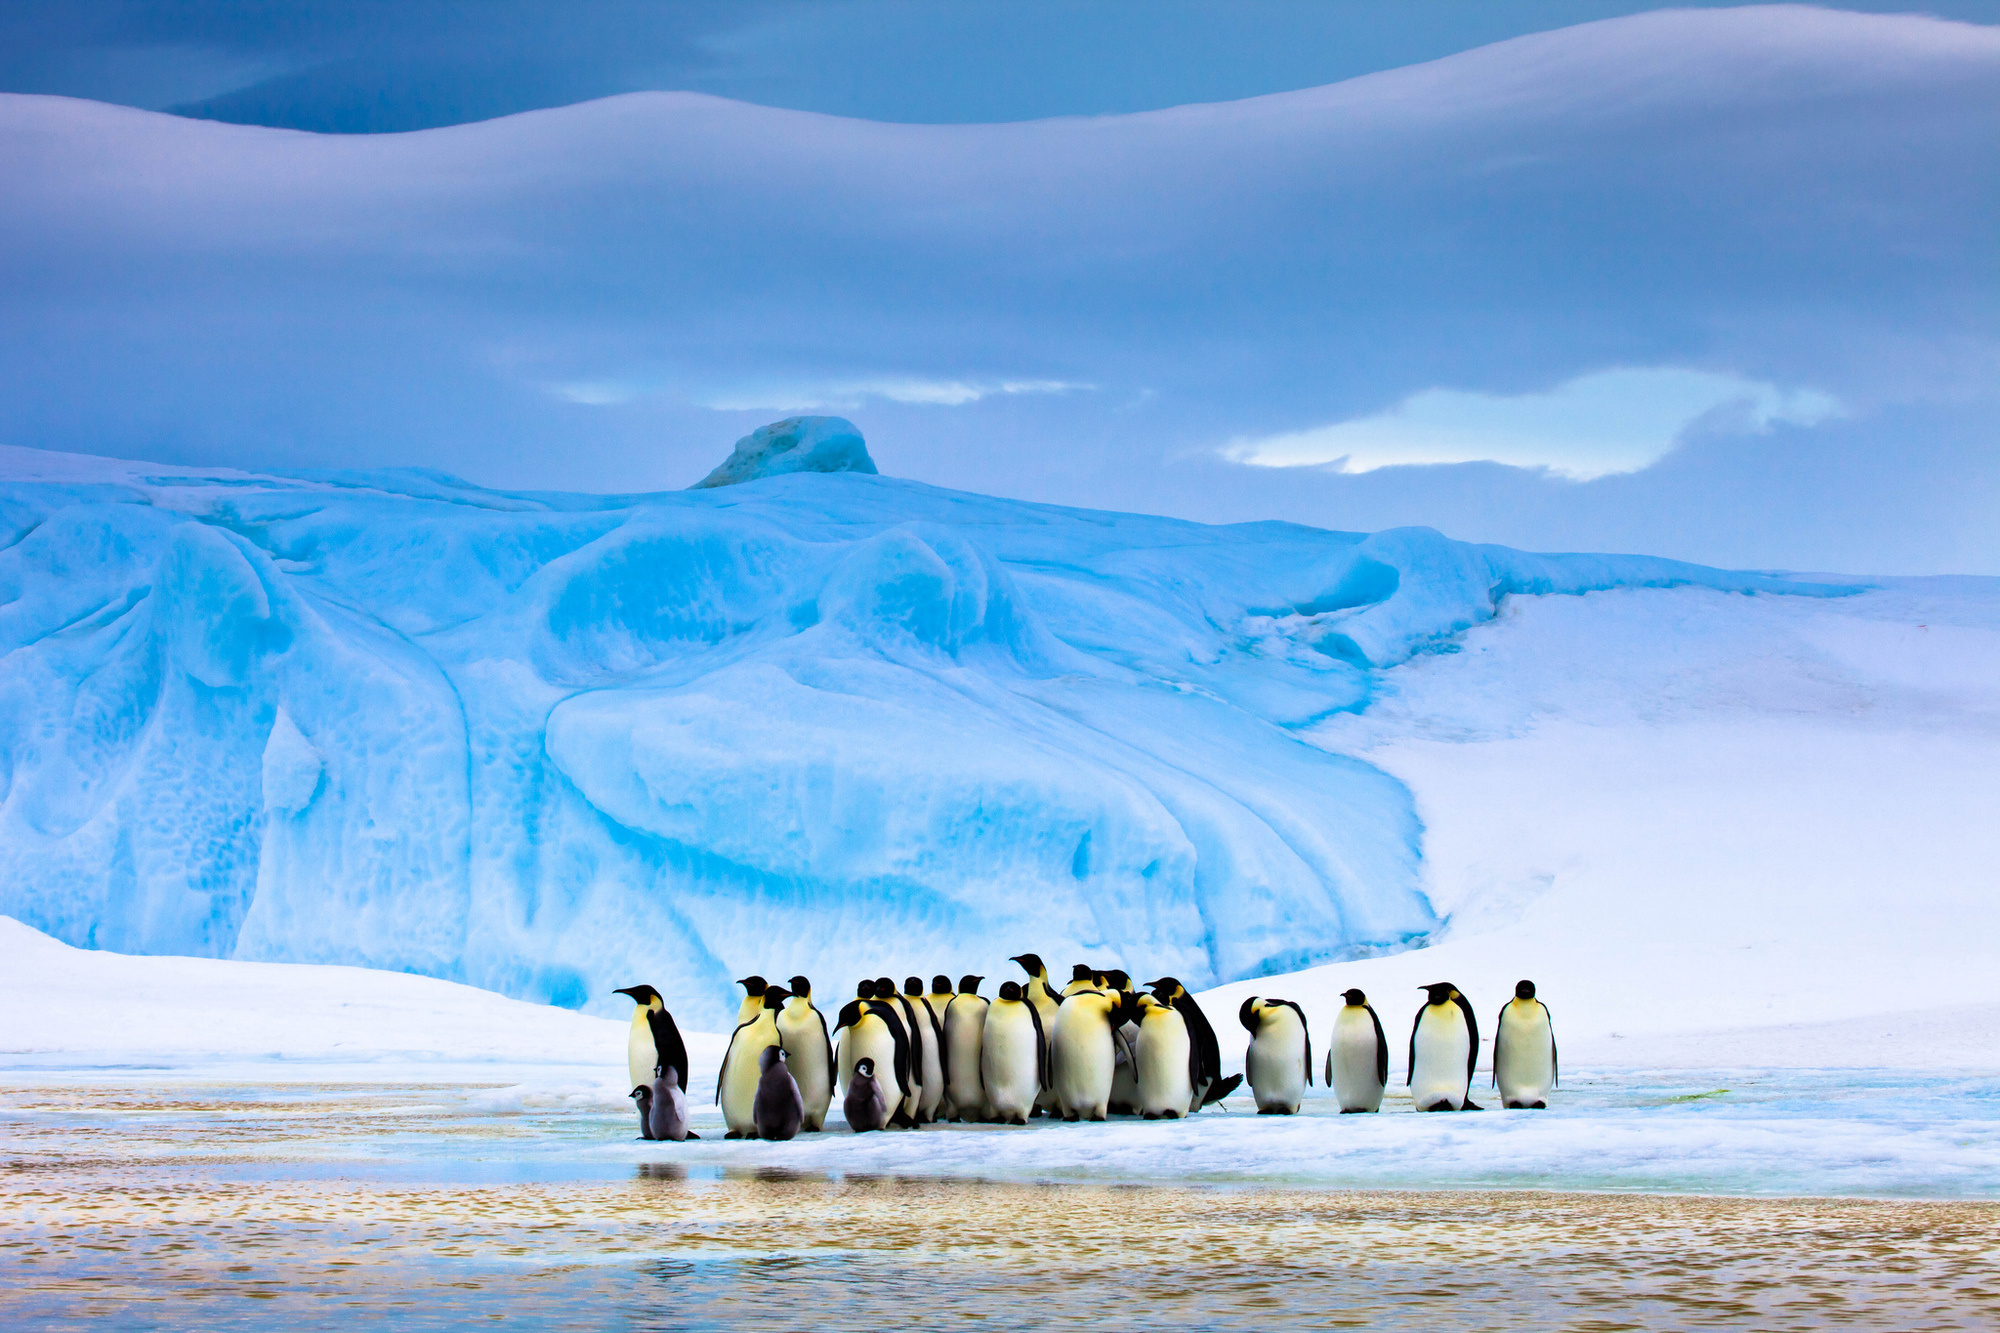 An emperor penguin in the middle of a huddle can warm its body temperature to about 99.5°F, despite the frigid air around it.